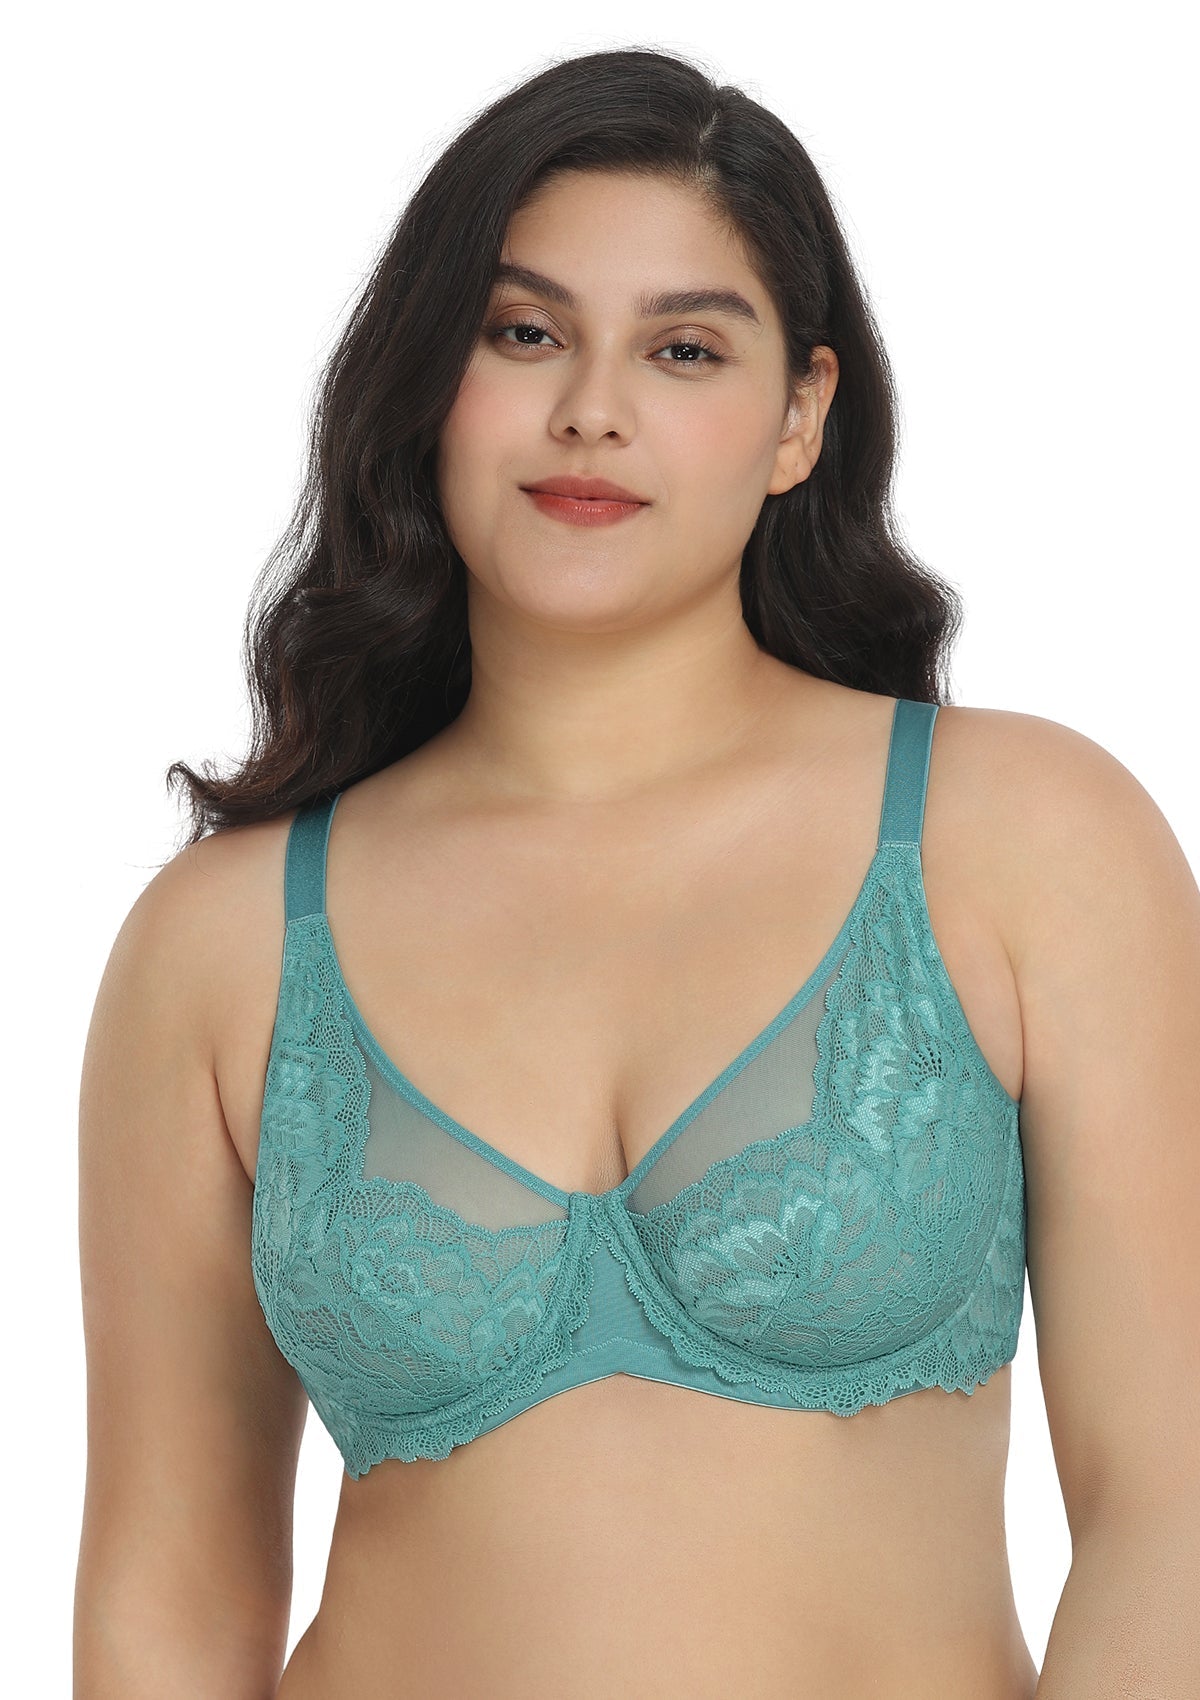 HSIA Paeonia Lace Full Coverage Underwire Non-Padded Uplifting Bra - Purple / 42 / D